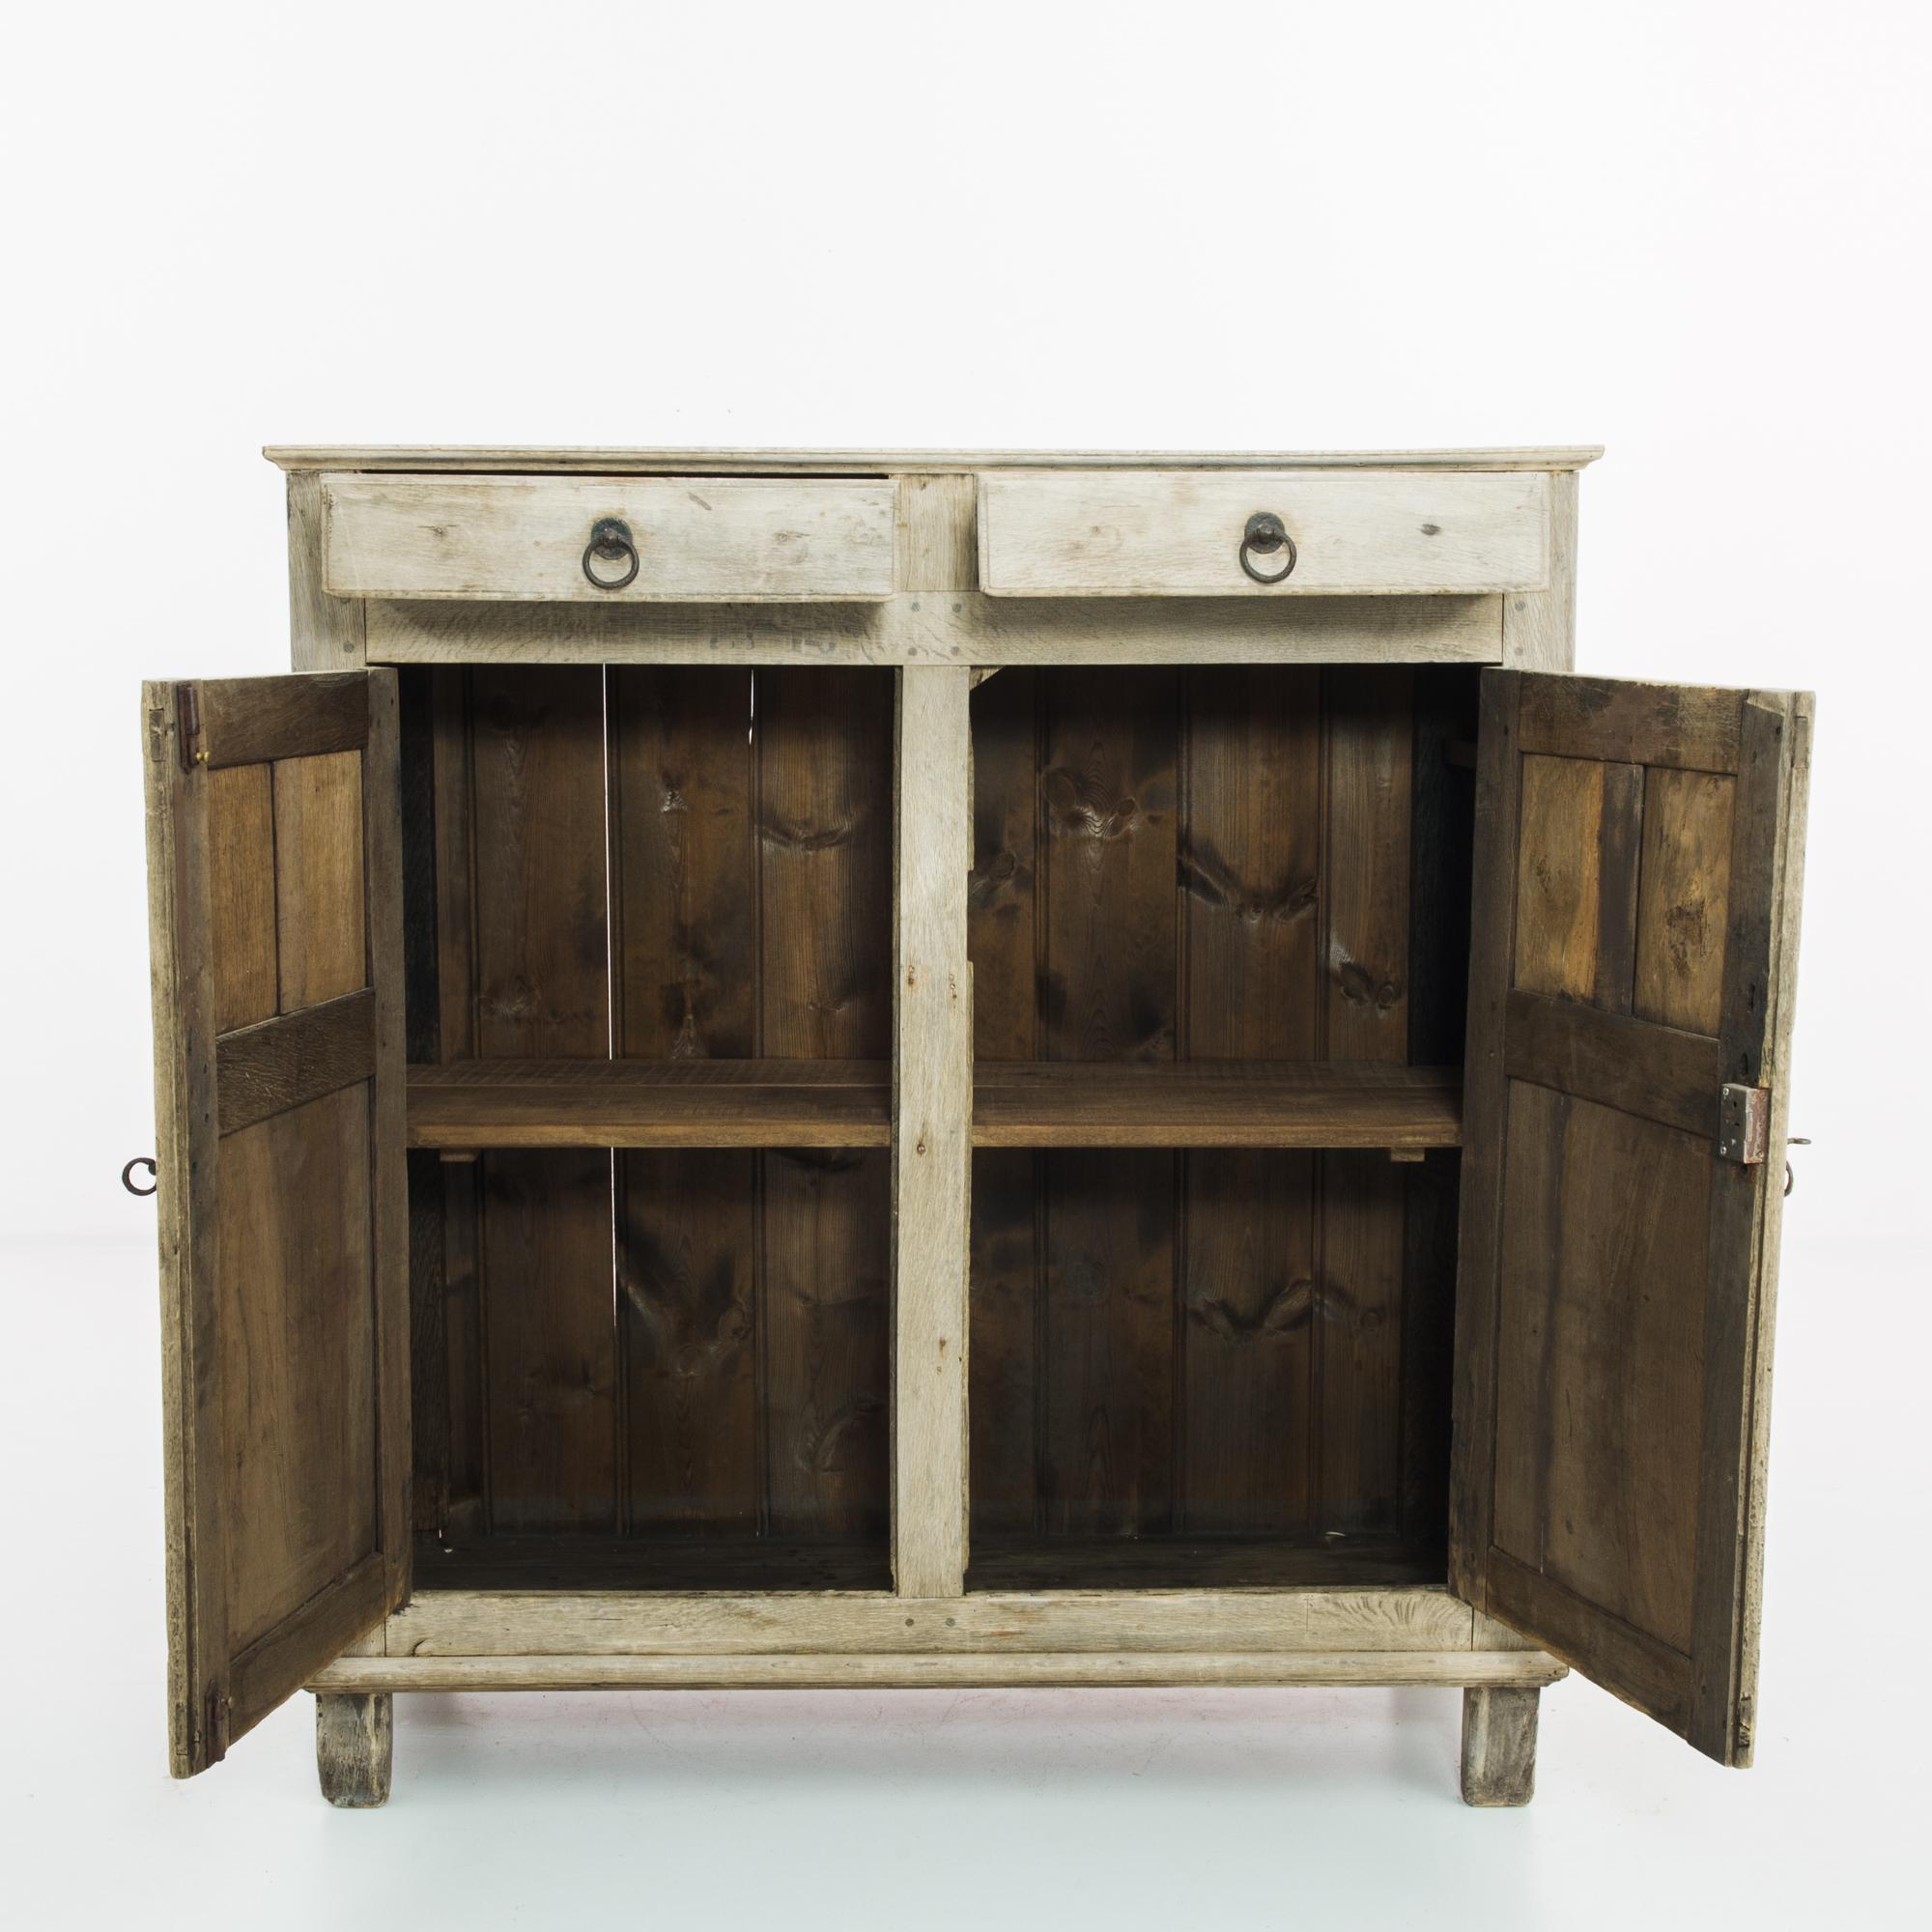 An oak buffet from 1860s Belgium. An upright frame, elevated upon square feet; panelling on the cupboard doors and cabinet adds a sober decorative touch. Door hinges, lock pieces and drawer handles in cast-iron lend a subtly gothic inflection,